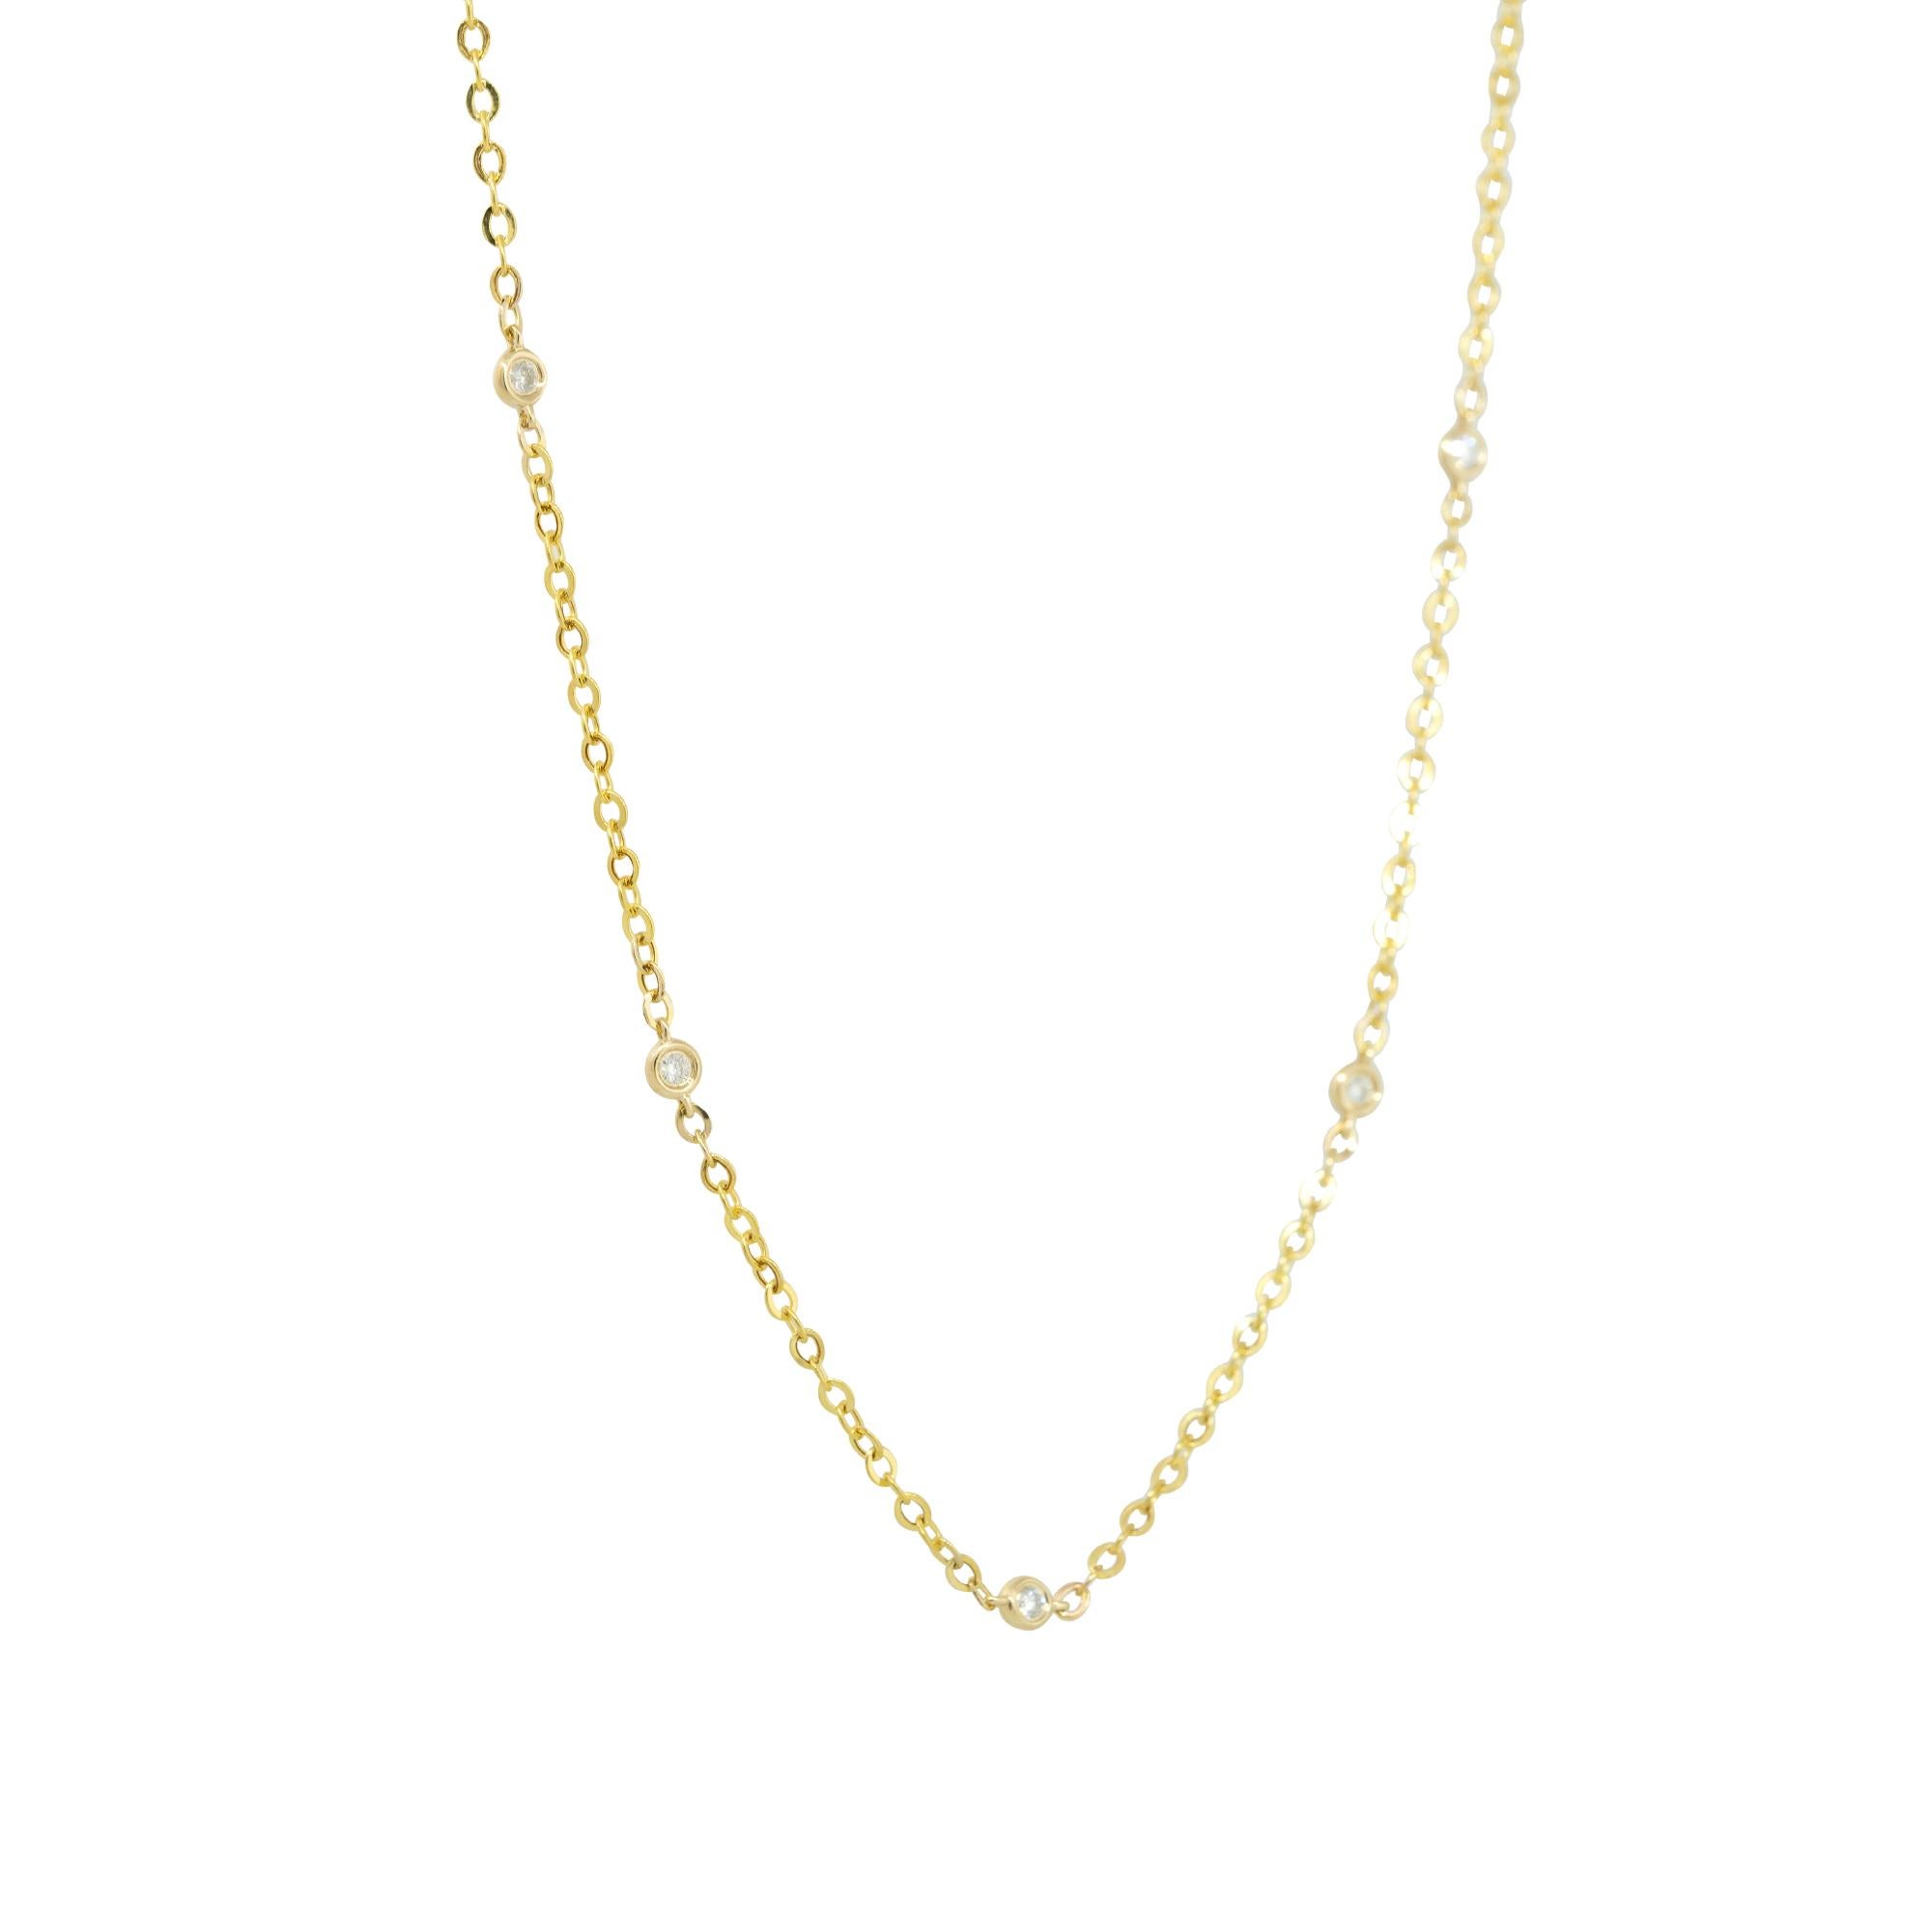 14k Yellow Gold 0.15ctw Diamonds by the Yard Necklace
Material: 14k Yellow Gold
Diamond Details: Approximately 0.15ctw of Round Brilliant Diamonds. There are 7, bezel set, Diamond stations along the chain
Item Length: 15.5-16.5